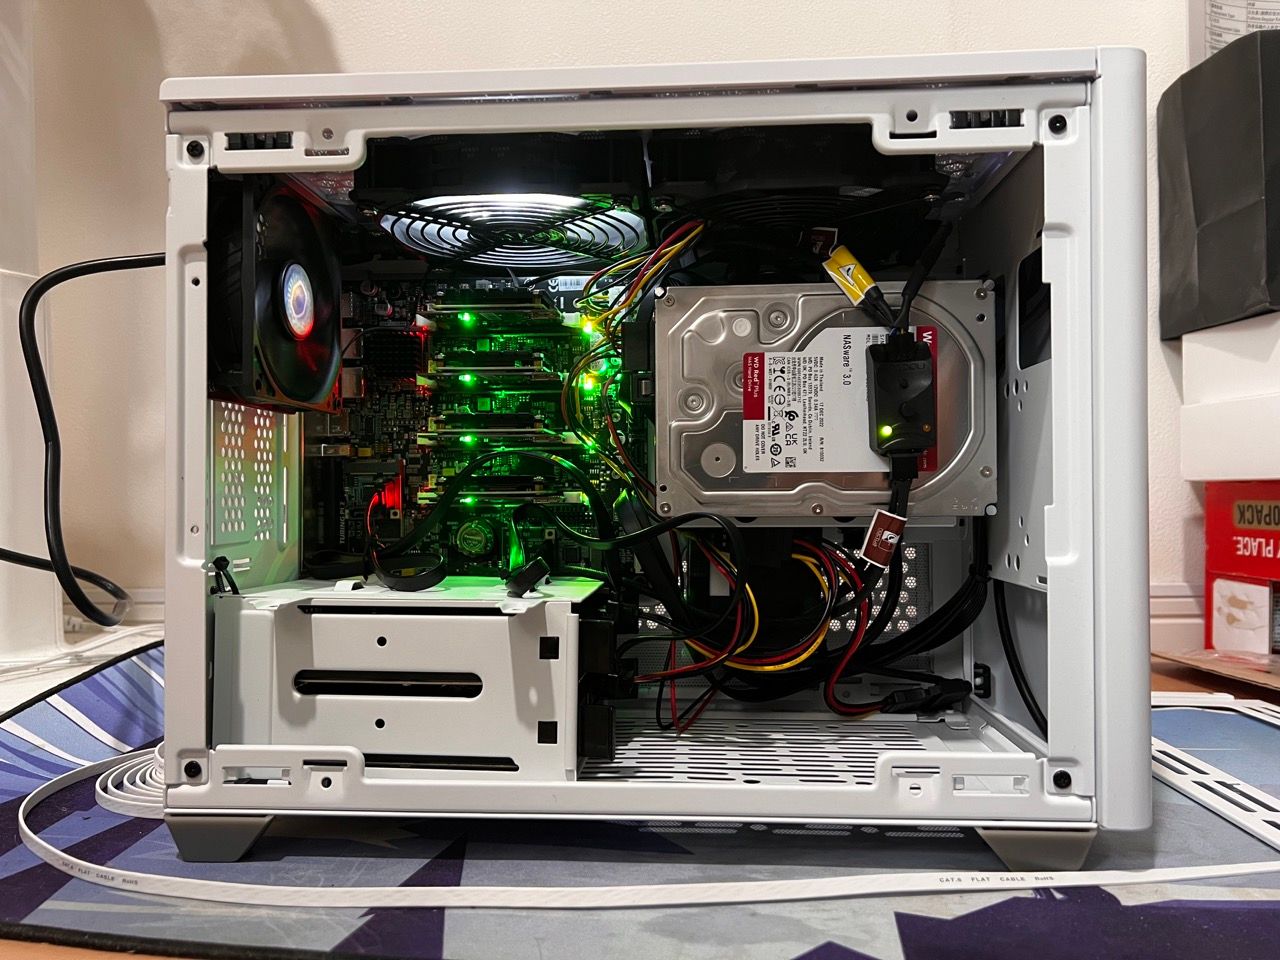 Gallery: building my own home server